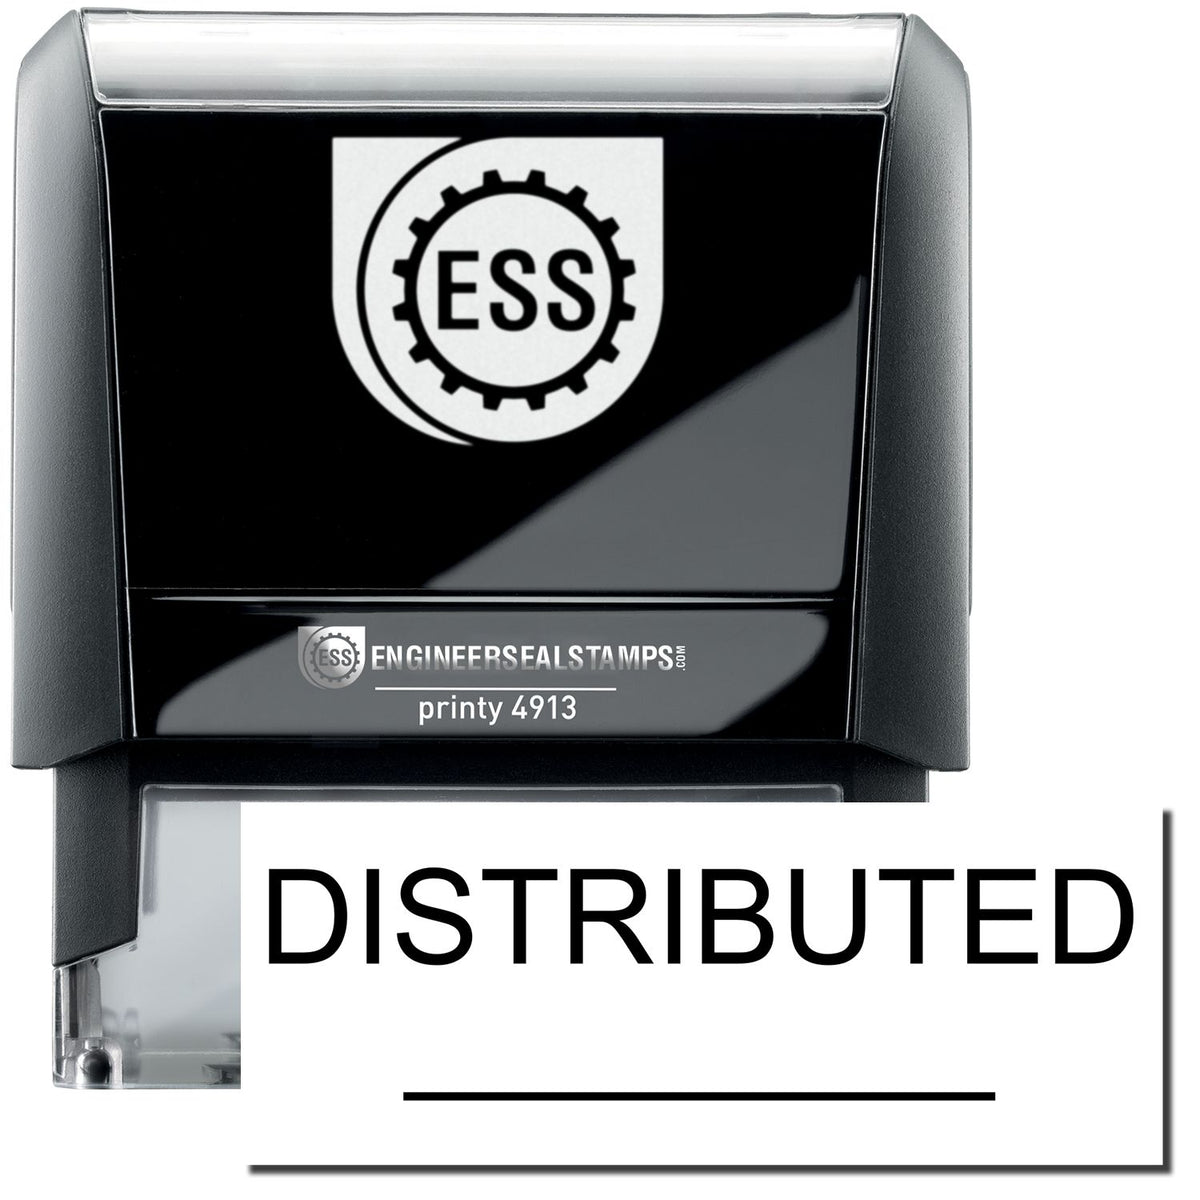 A self-inking stamp with a stamped image showing how the text &quot;DISTRIBUTED&quot; in a large bold font with a line is displayed by it.